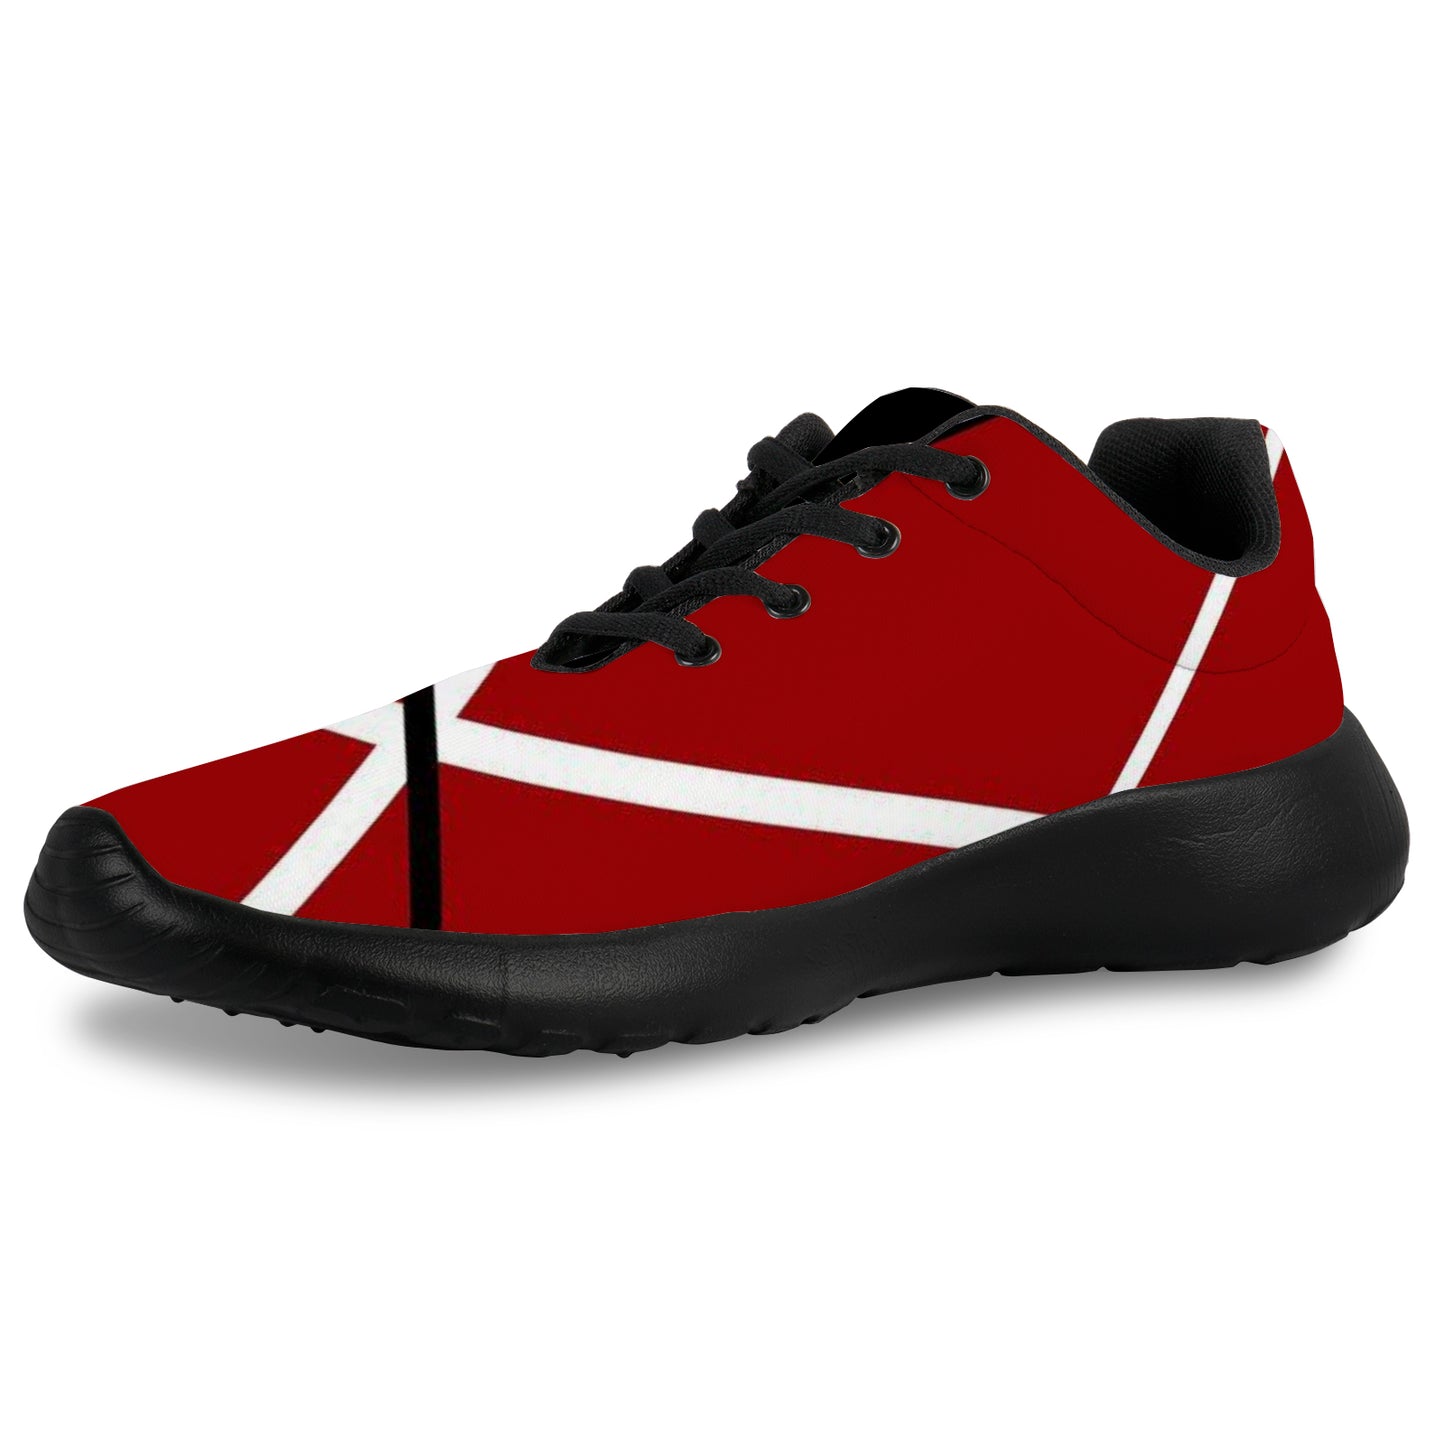 Women's Athletic Shoes - Red/Black